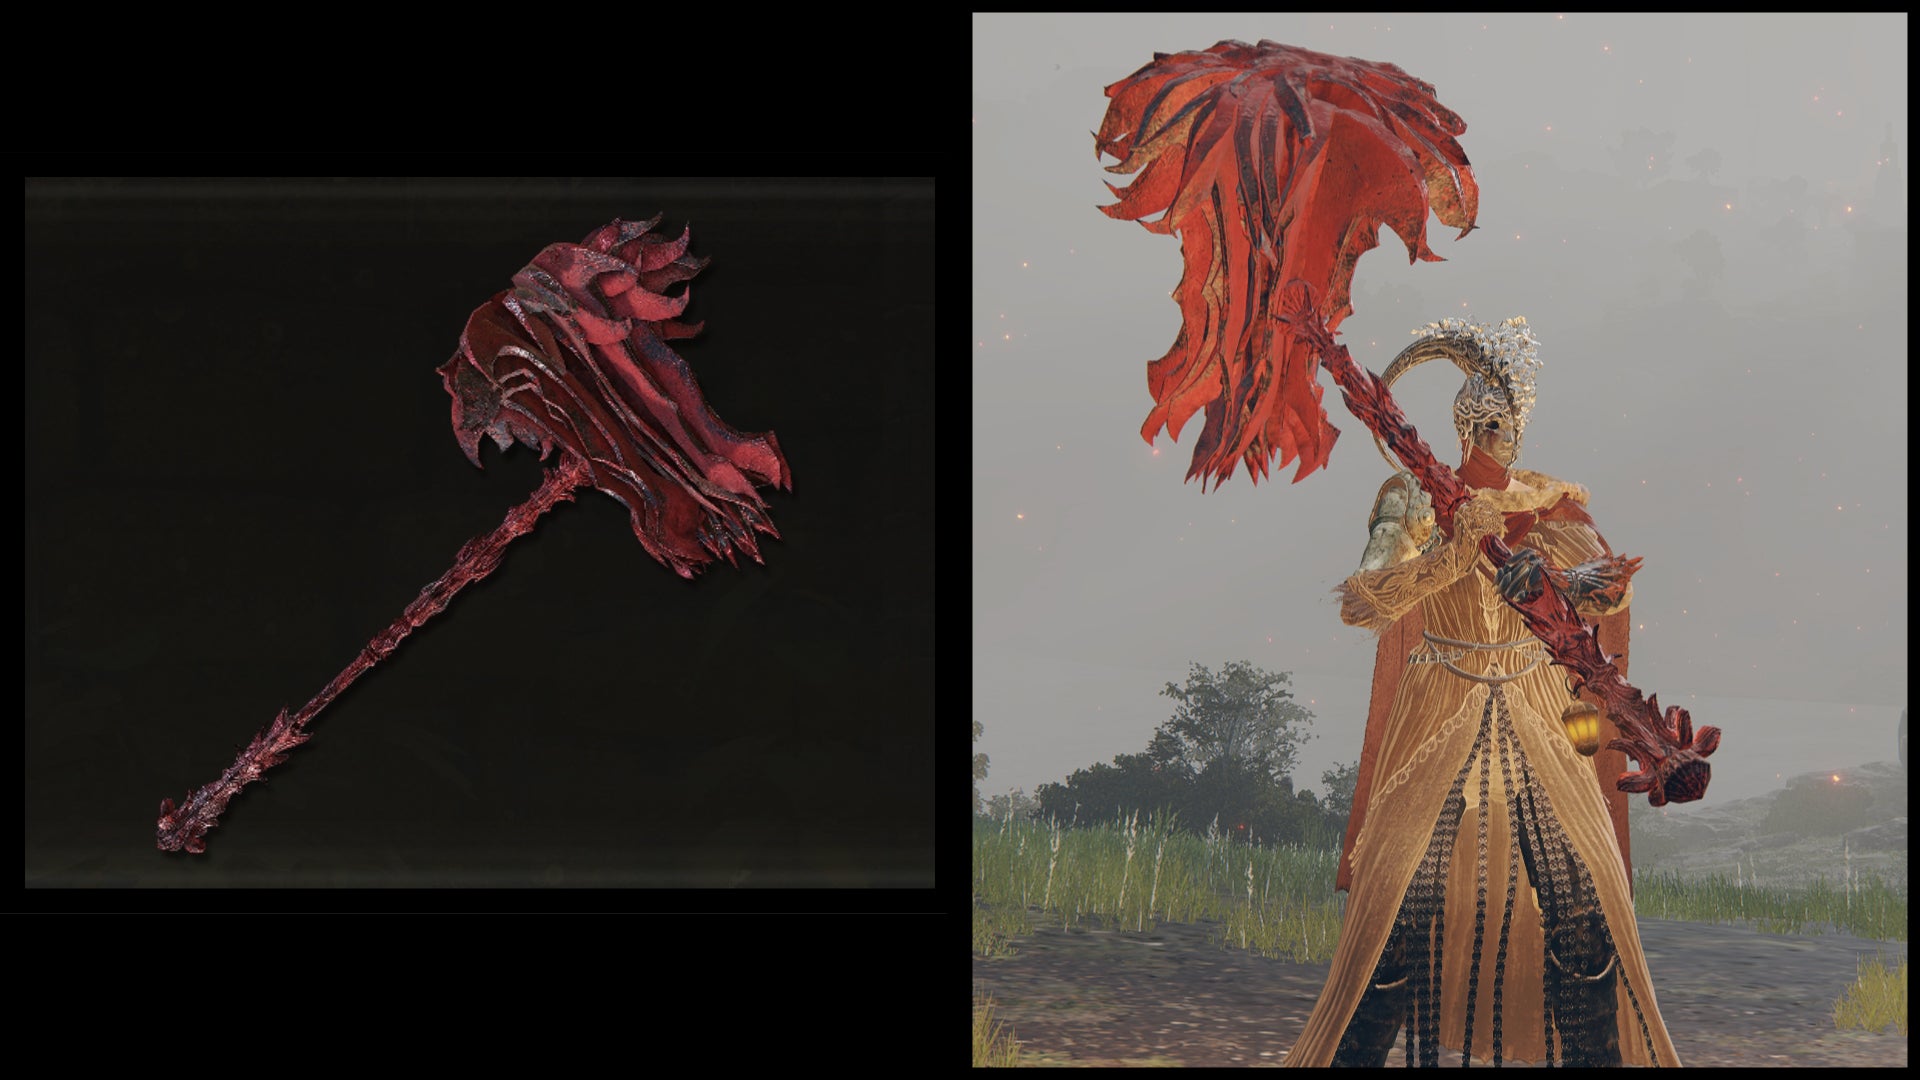 Left: an illustration of the Prelate Inferno Crozier from Elden Ring. Right: the player character holding the same weapon against a Limgrave background.